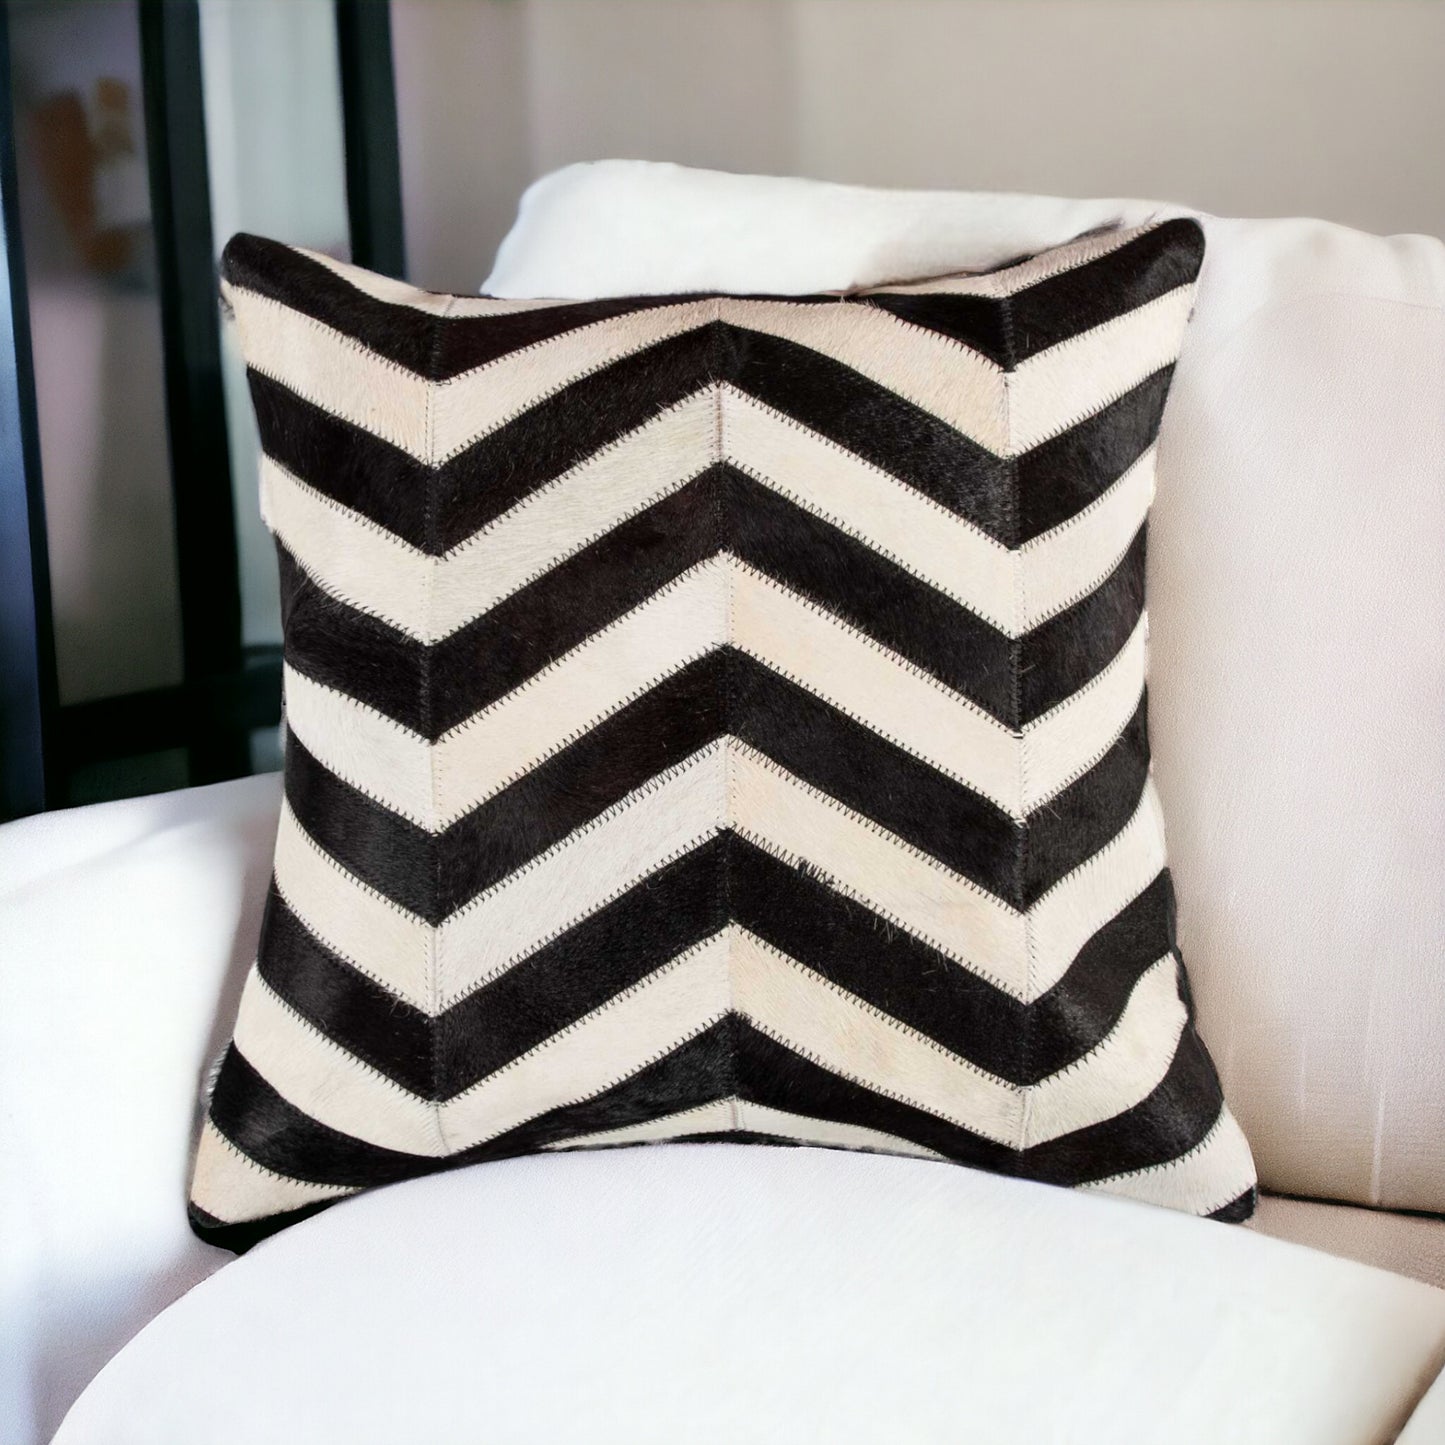 18" Black and Off White Cowhide Throw Pillow